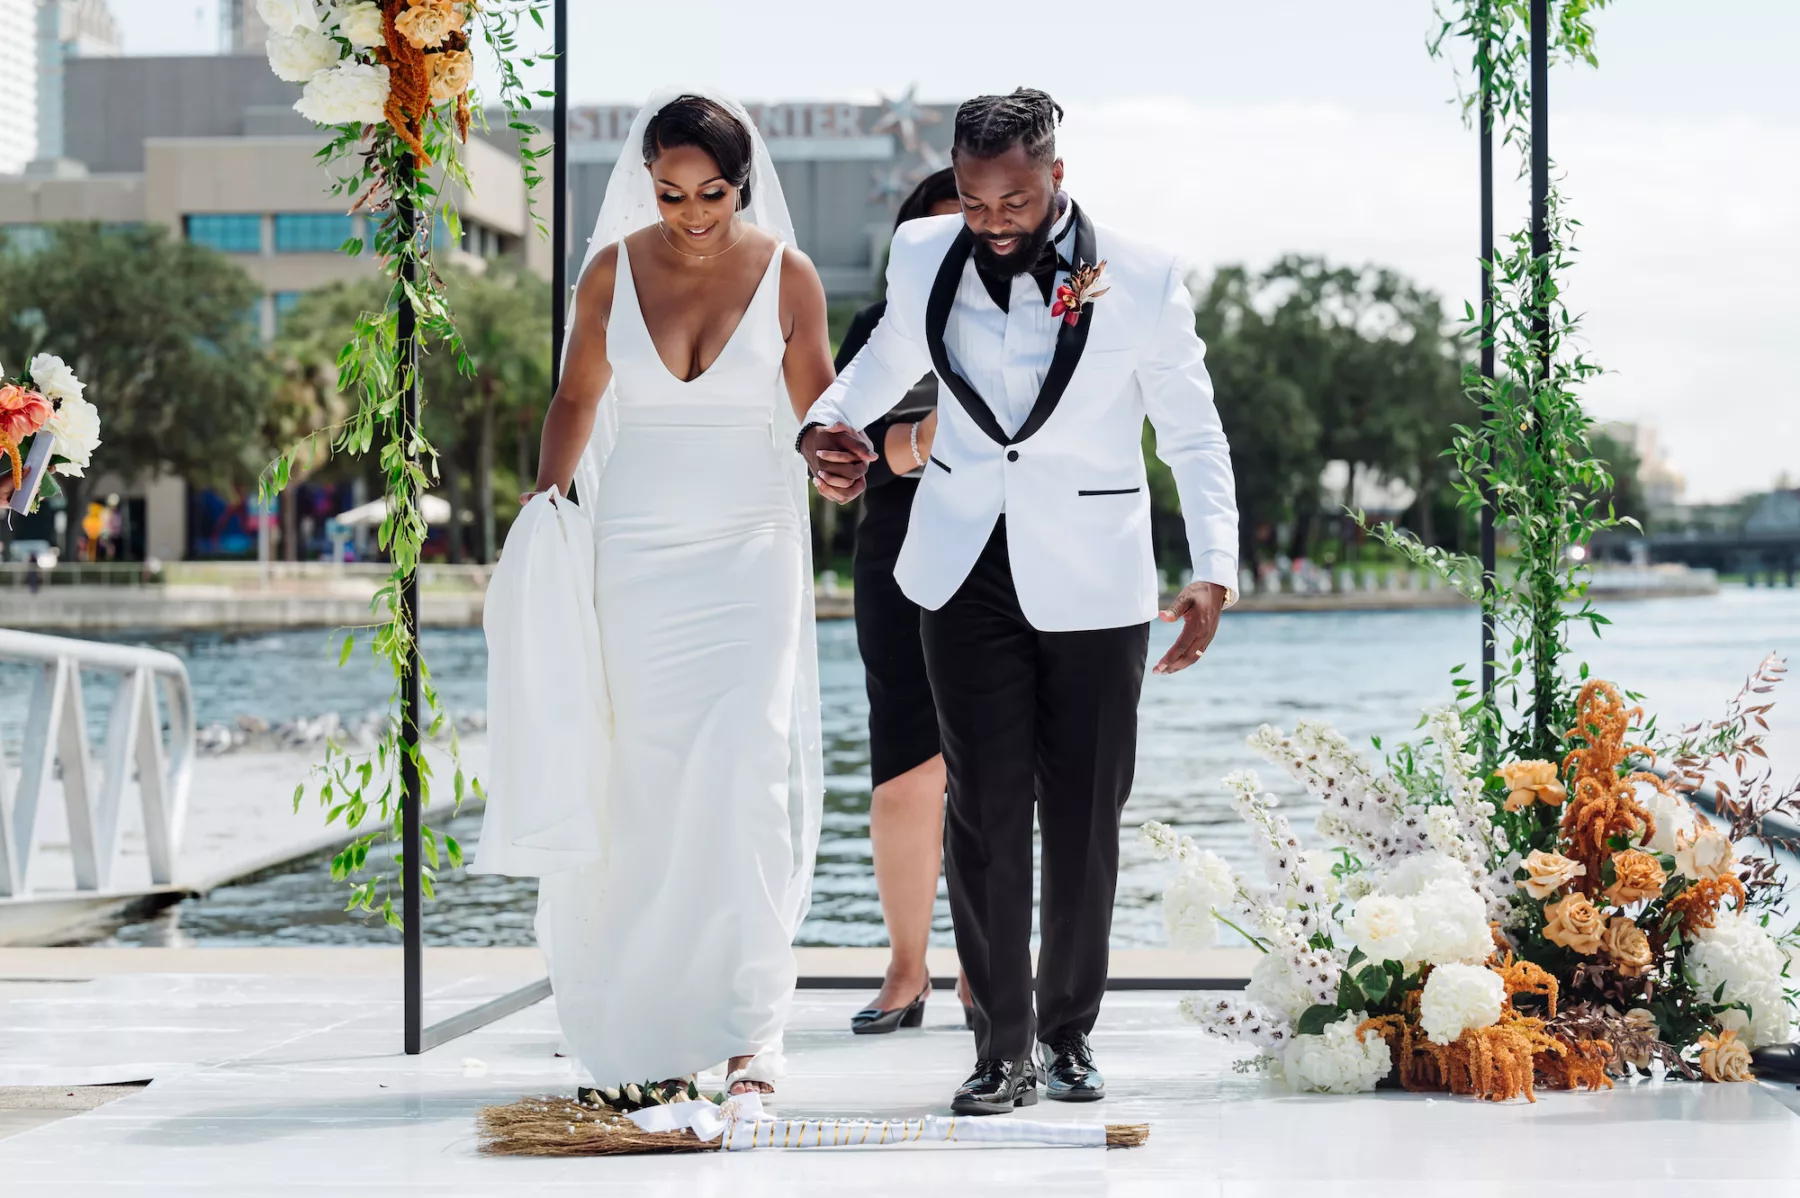 Jumping The Broom Wedding Ceremony Tradition